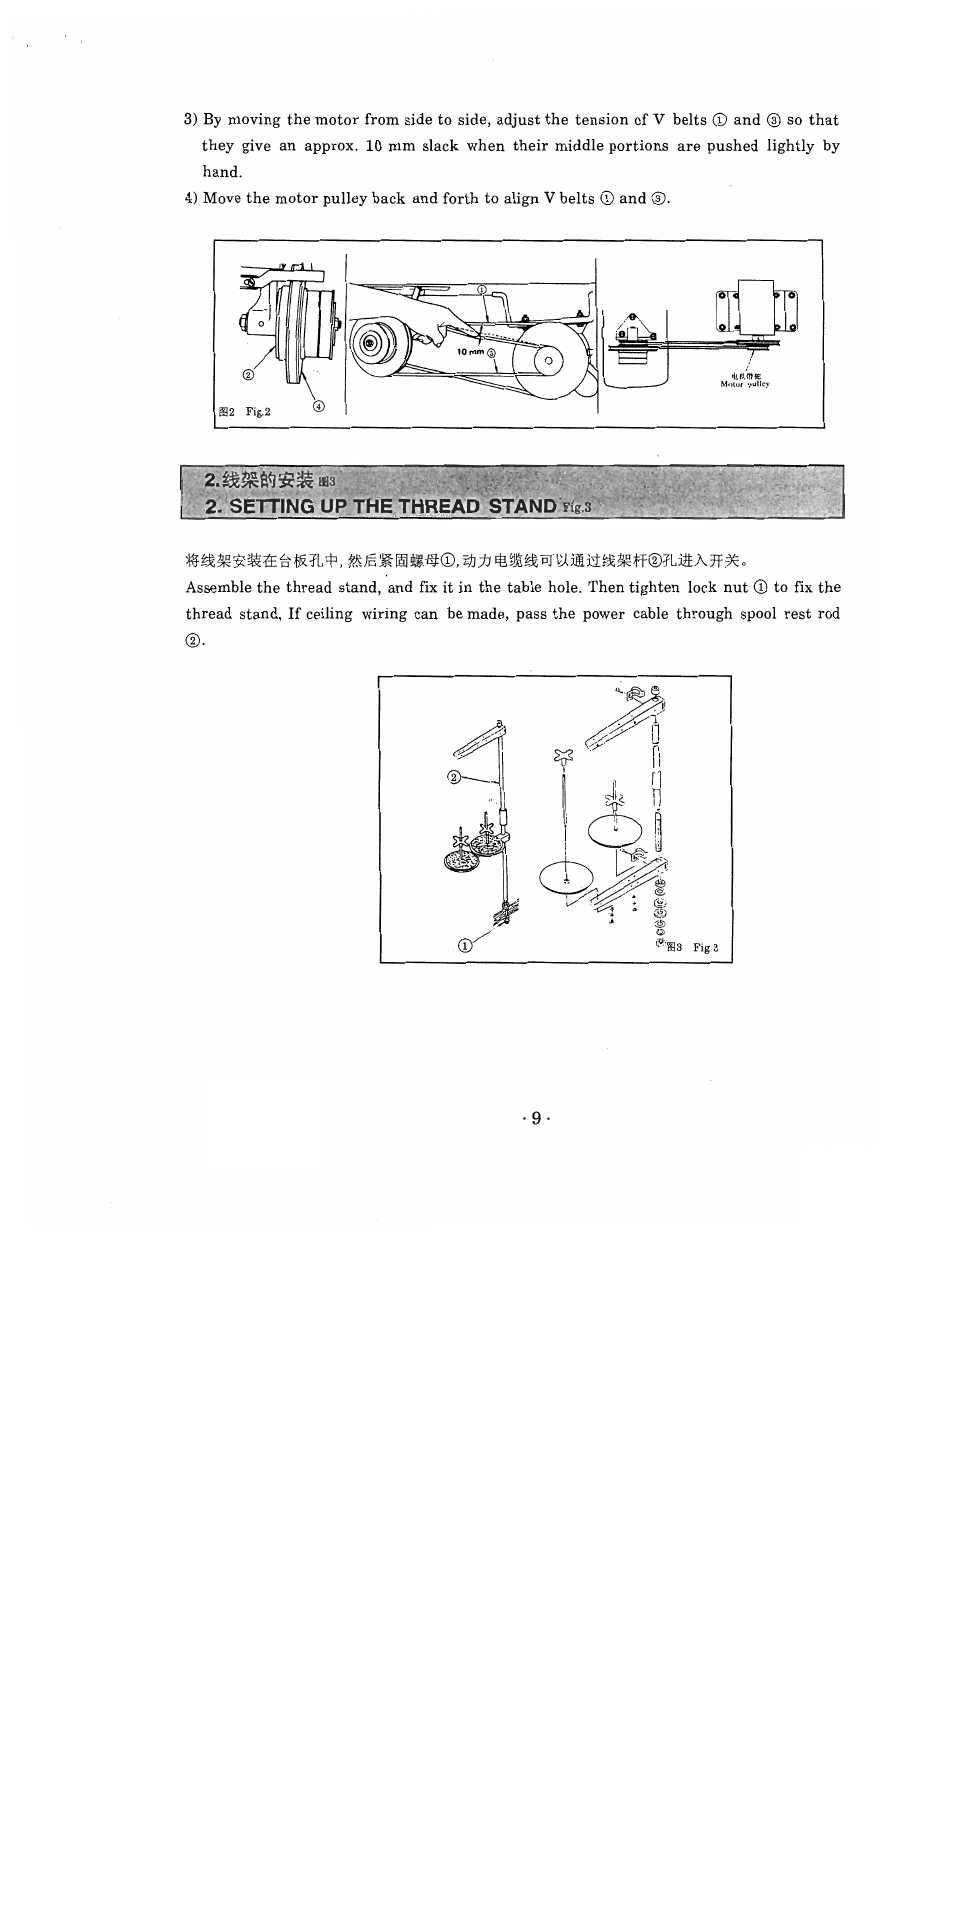 Setting up the thread stand figs | SINGER 1371A2 User Manual | Page 12 / 86